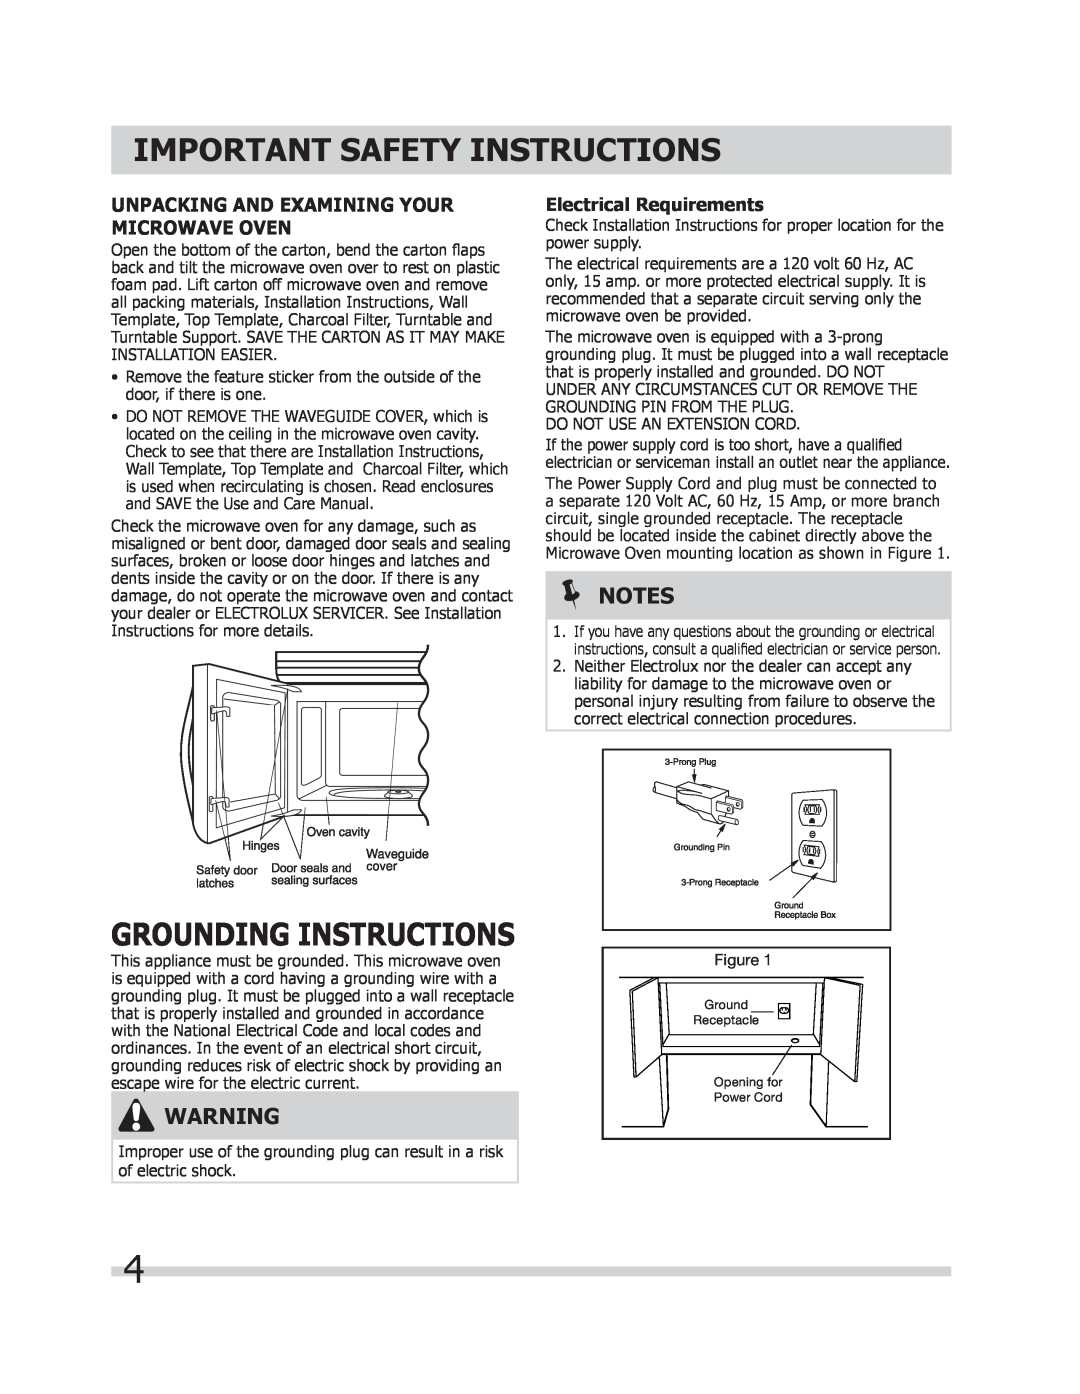 Frigidaire FPMV189KF Unpacking And Examining Your Microwave Oven, Electrical Requirements, Important Safety Instructions 